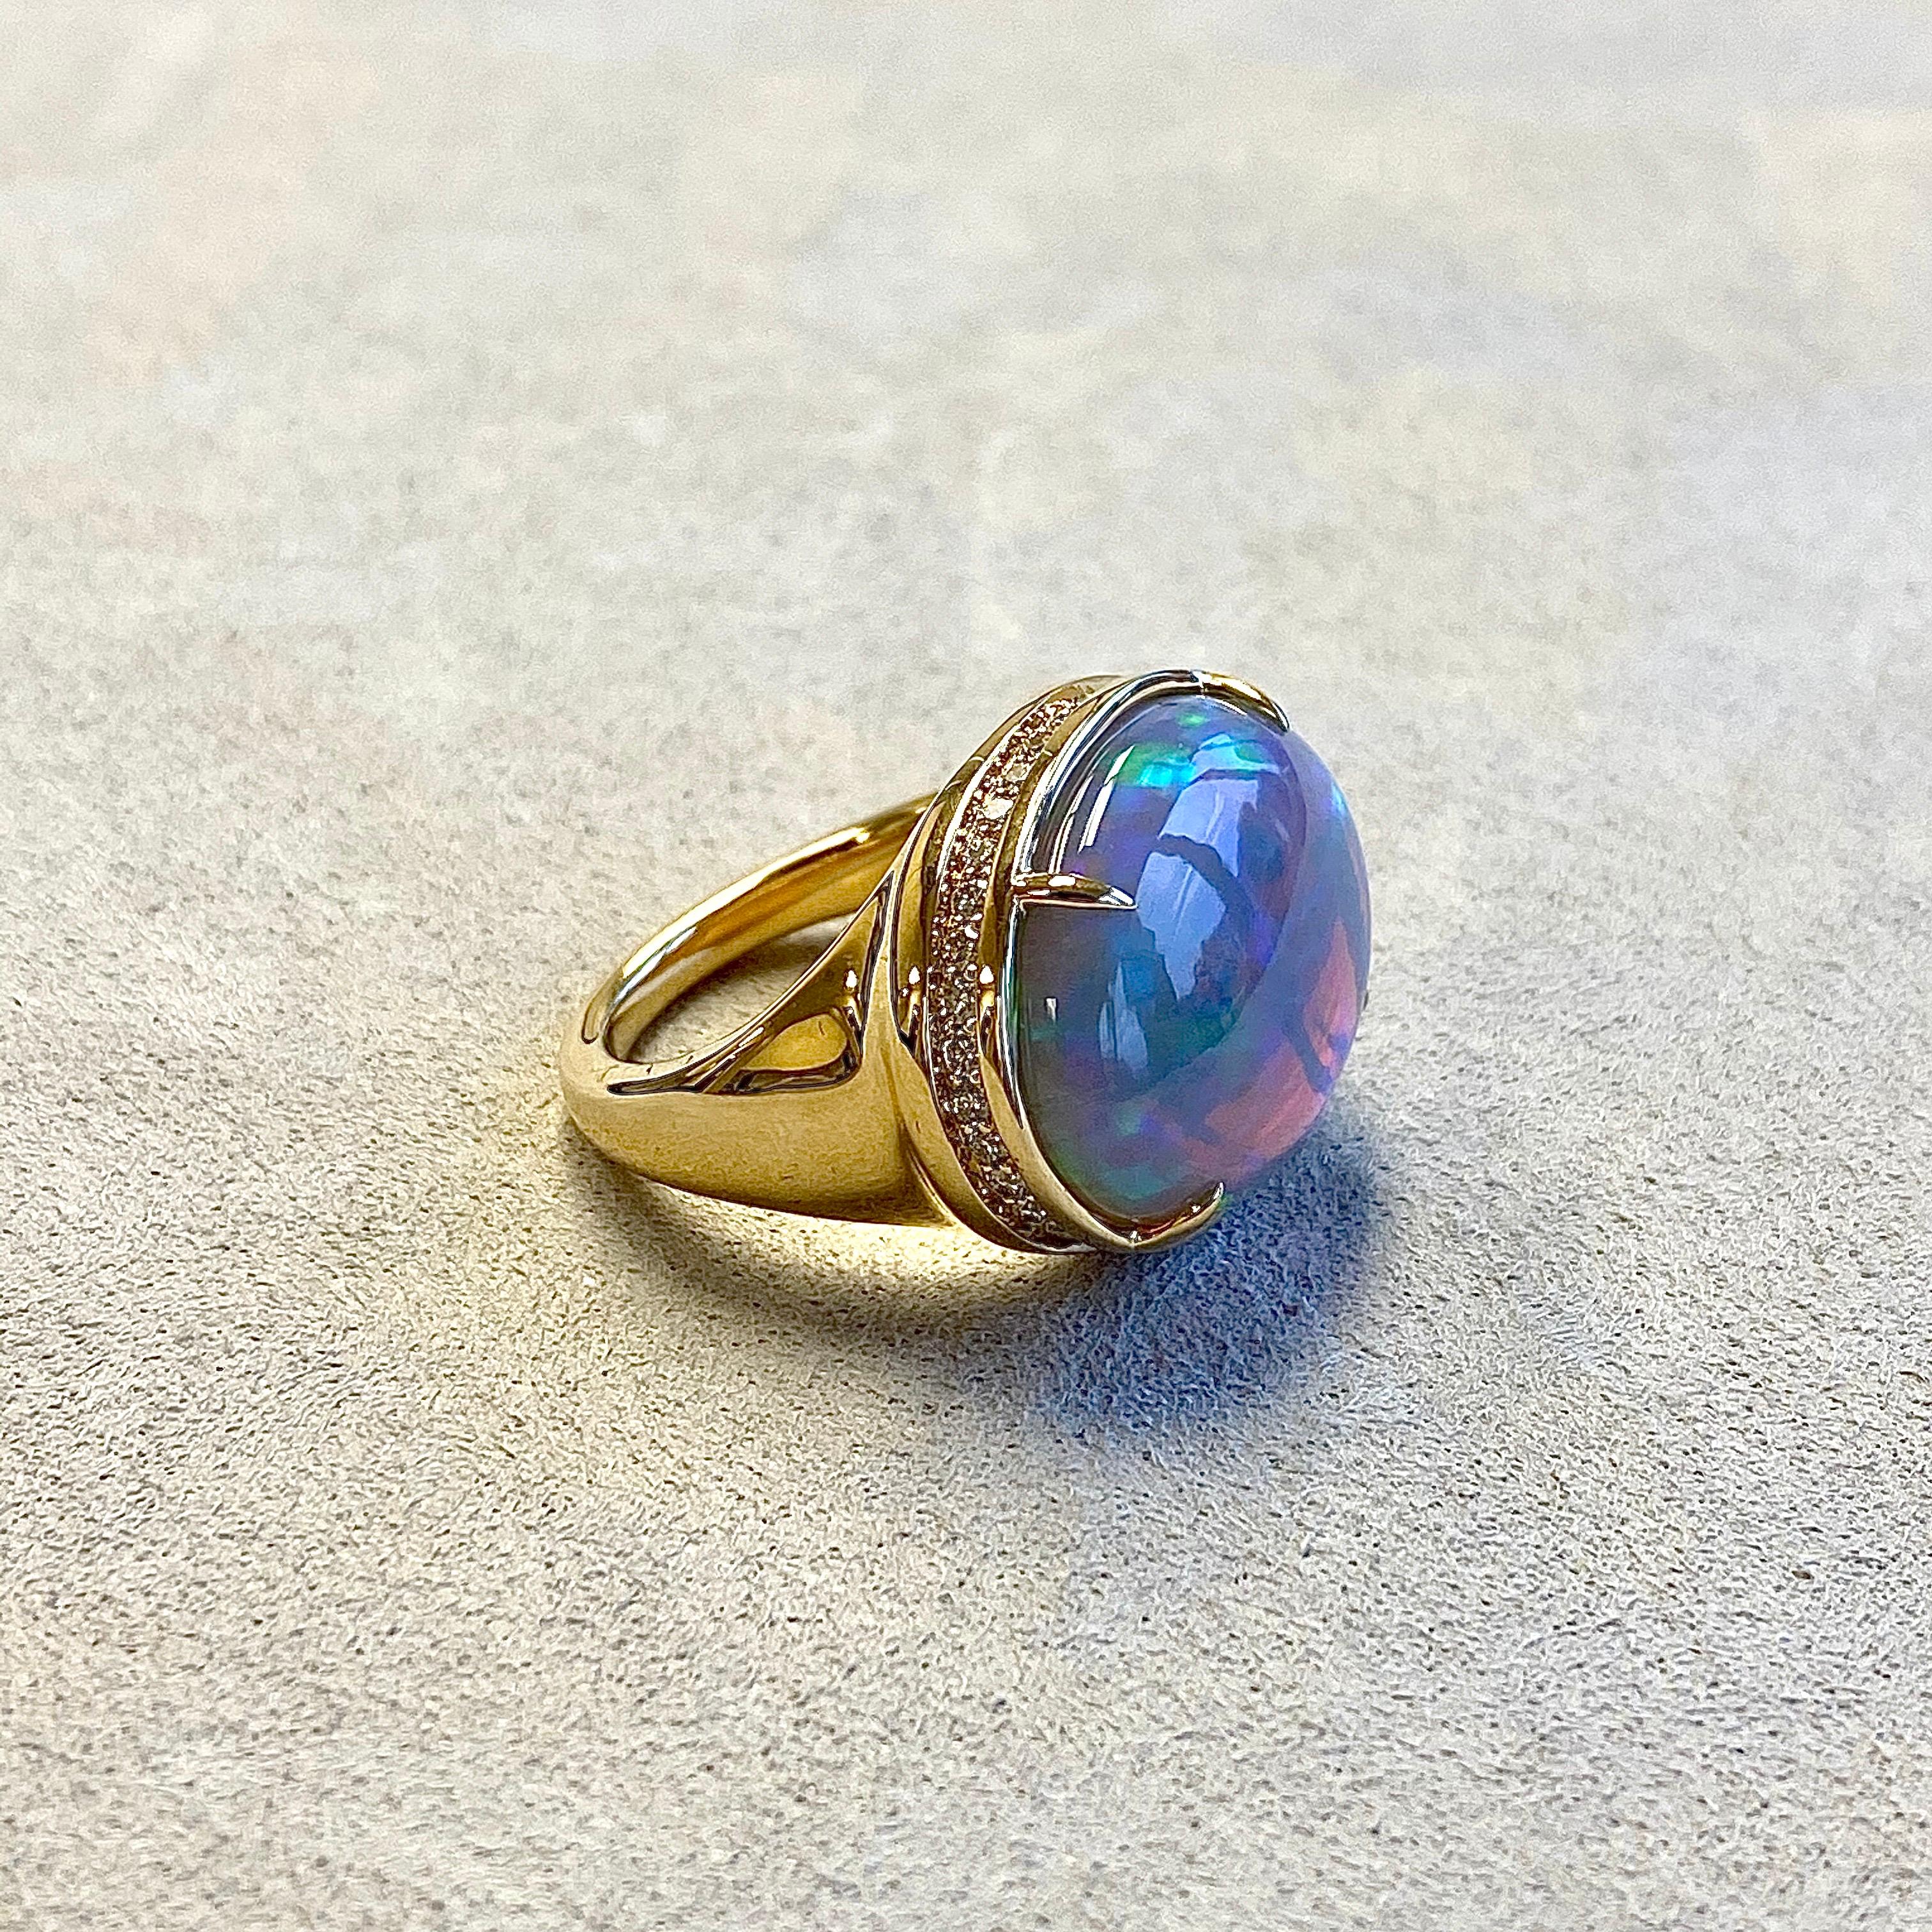 Created in 18 karat yellow gold
Ethiopian Opal 9.75 cts approx
Diamonds 0.45 ct approx
Ring size US 7, can be sized
One of a kind

About the Designers ~ Dharmesh & Namrata

Drawing inspiration from little things, Dharmesh & Namrata Kothari have